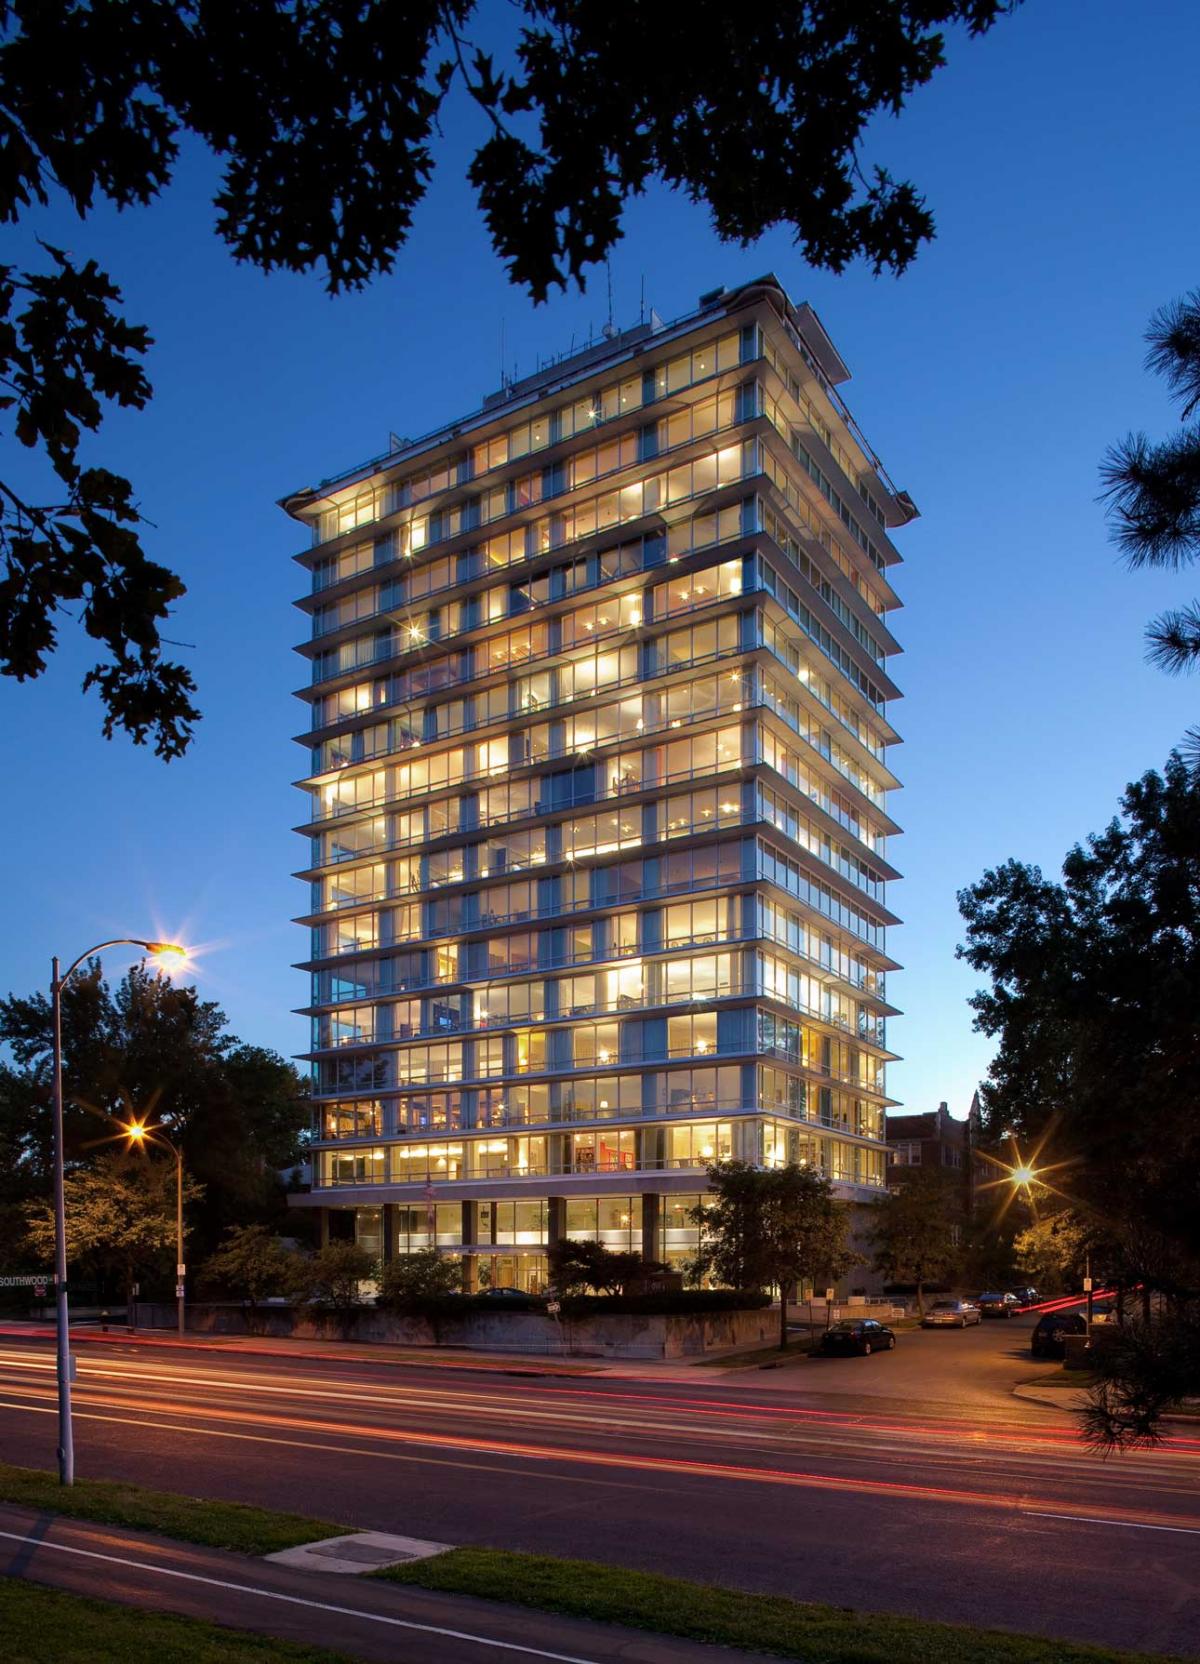 This tall, multi-story building has window walls from the top to the bottom of the structure.